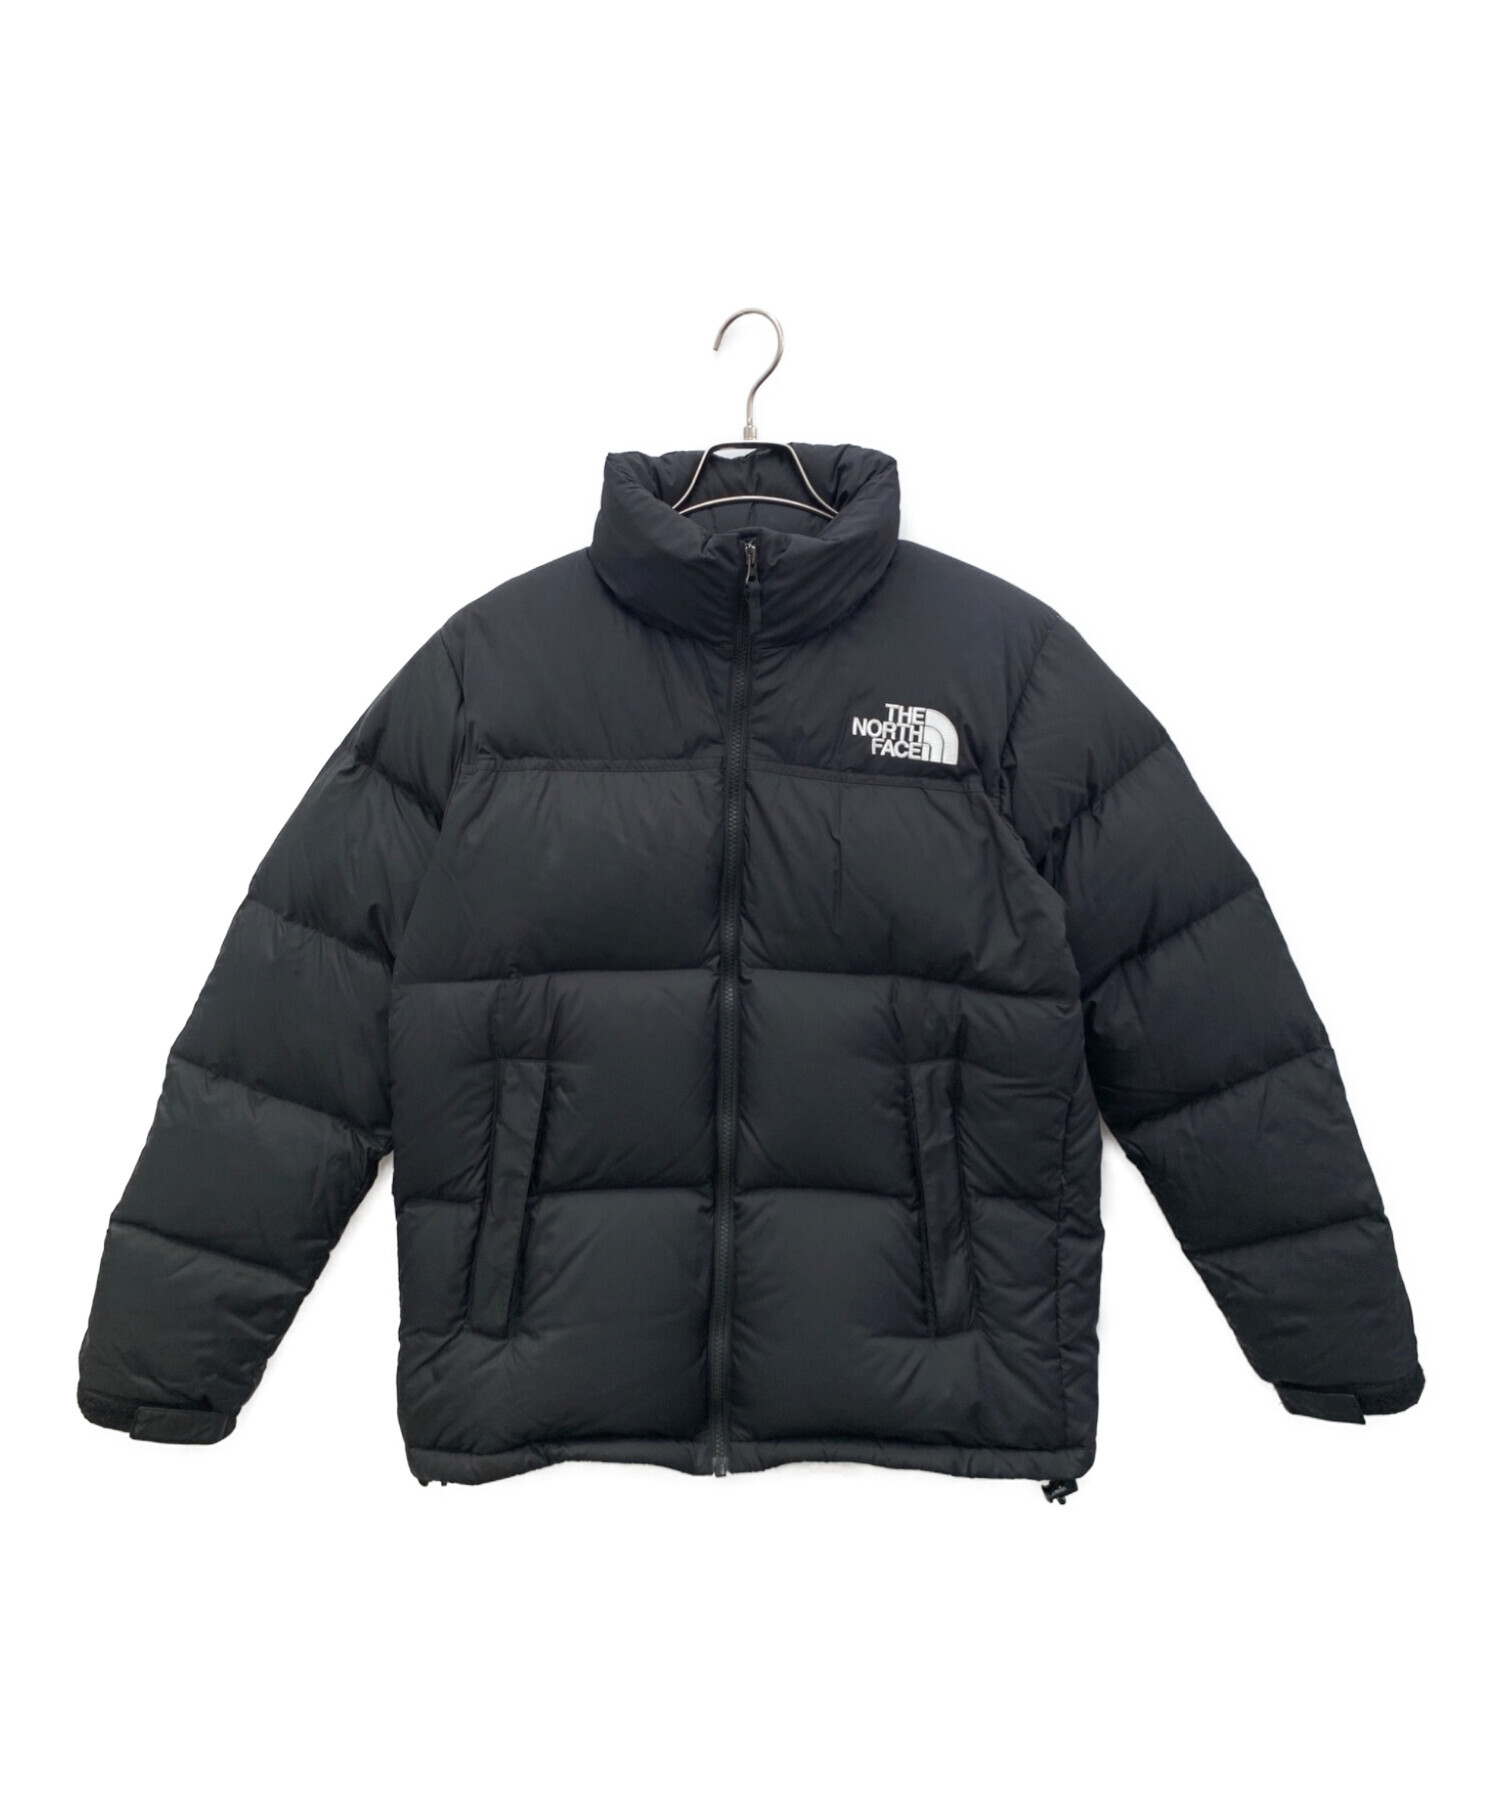 PASS-PORT QUILTED ZIP FLANNEL JACKETカラーNAVY - ブルゾン